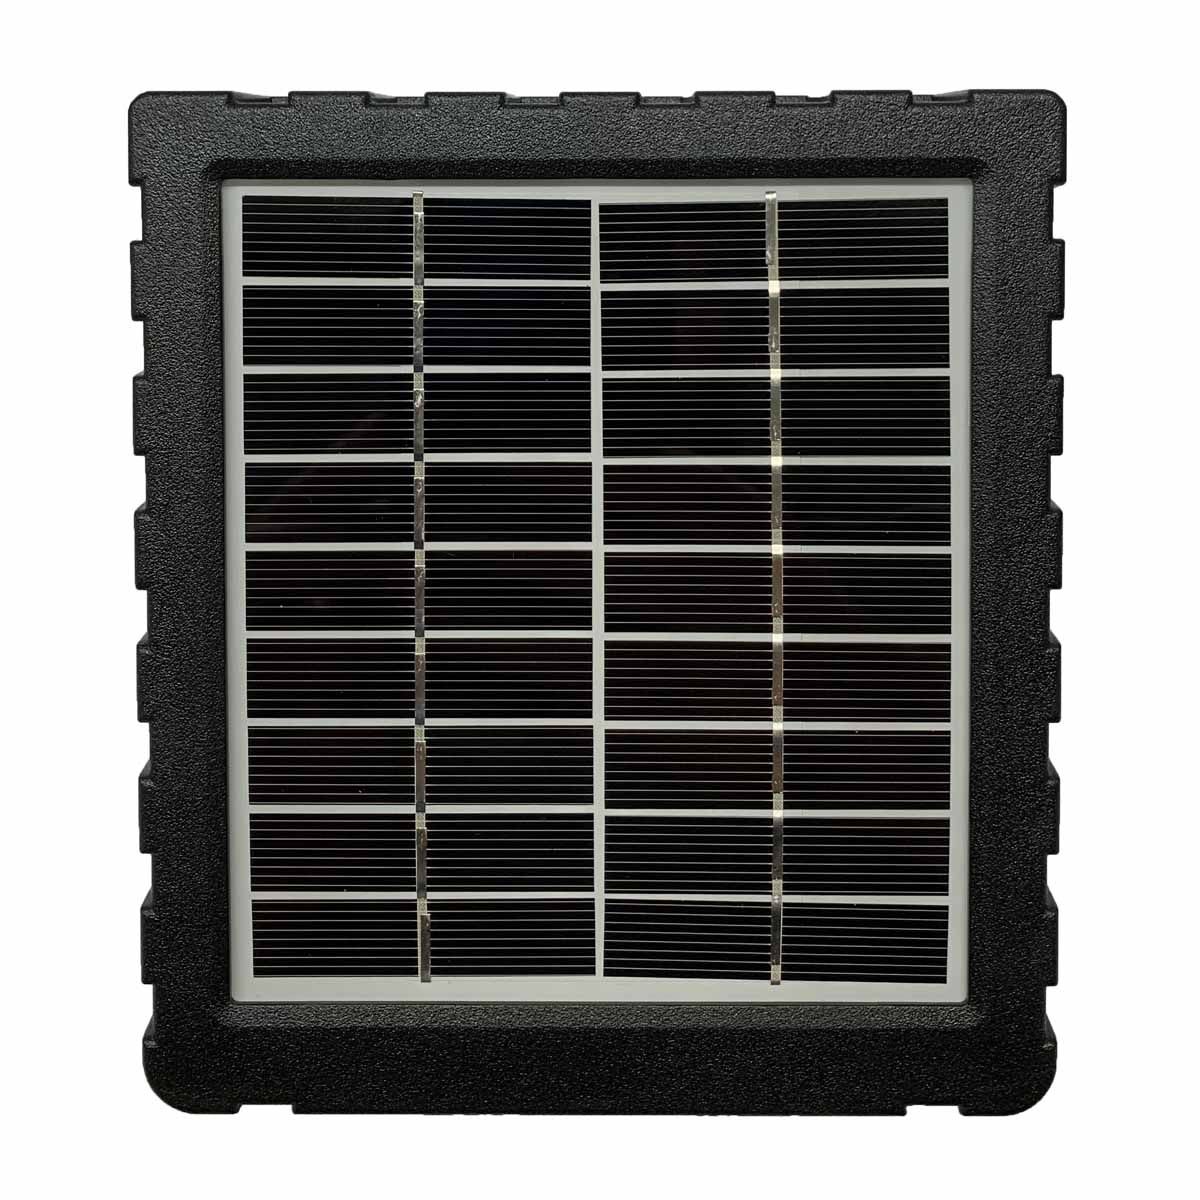 Accura Tracker solar panel kit, extend your trail cameras life with this sleek solar panel